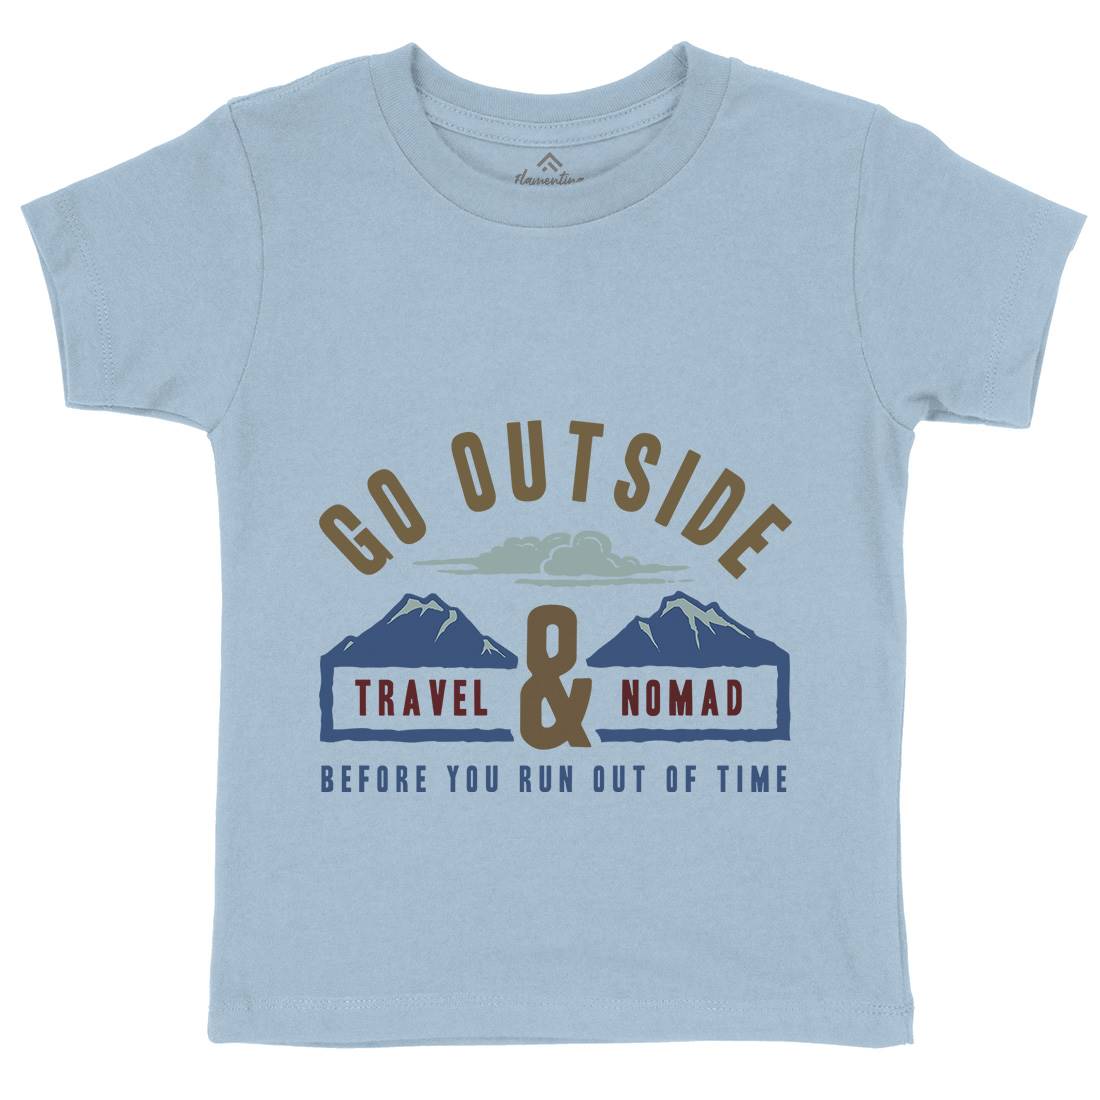 Travel And Nomad Kids Crew Neck T-Shirt Nature A388